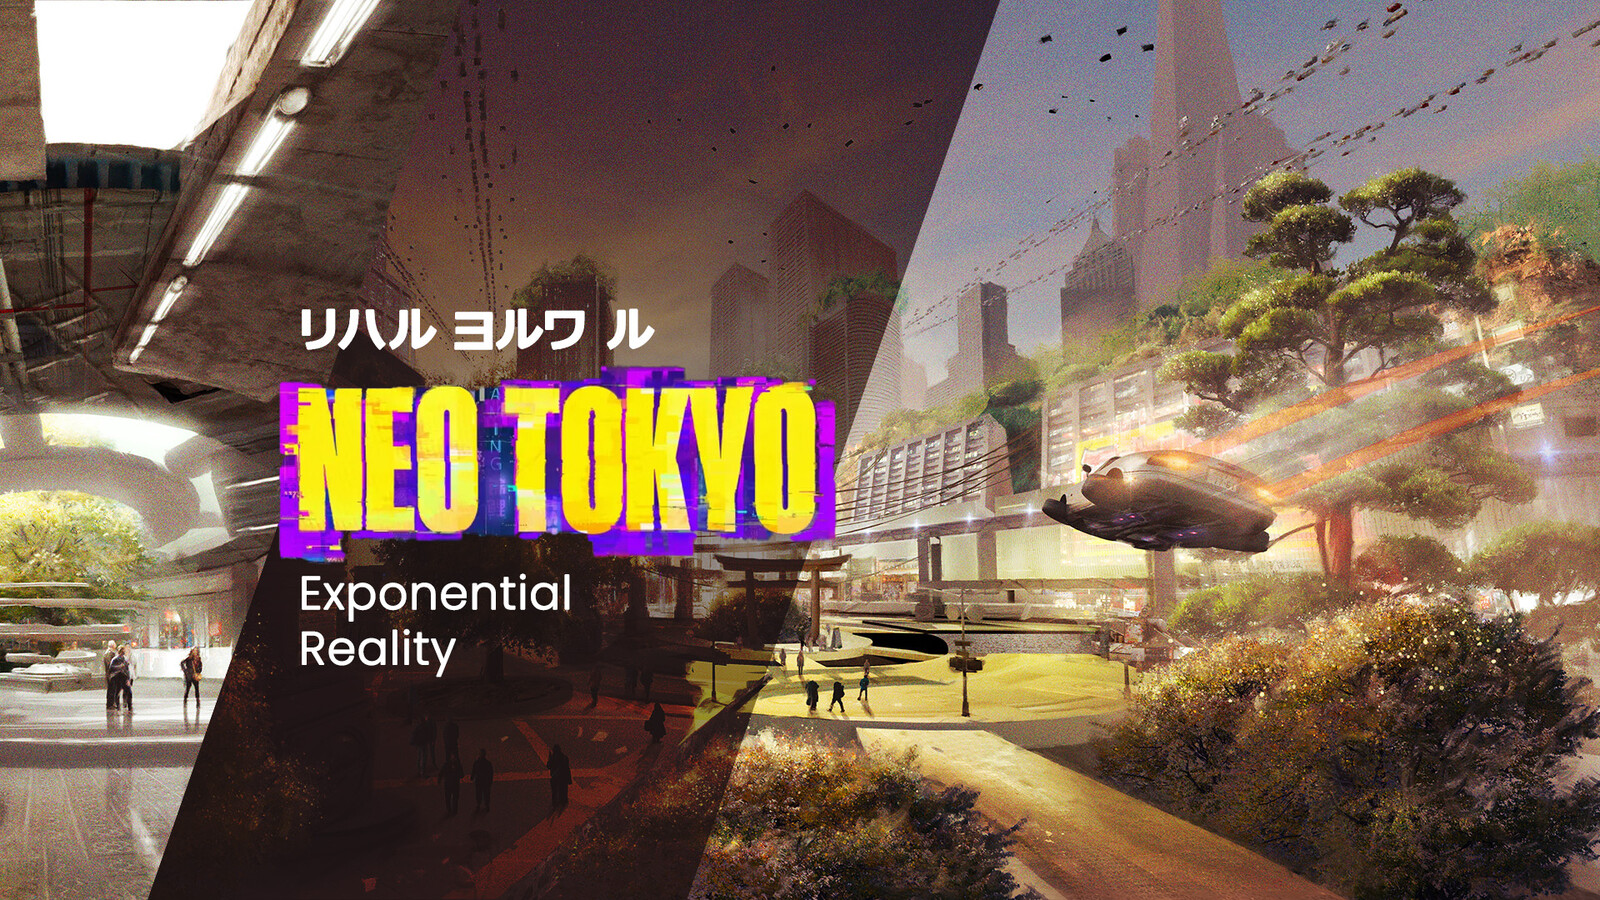 Neo-Tokyo - Exponential Reality - Environment concept submission